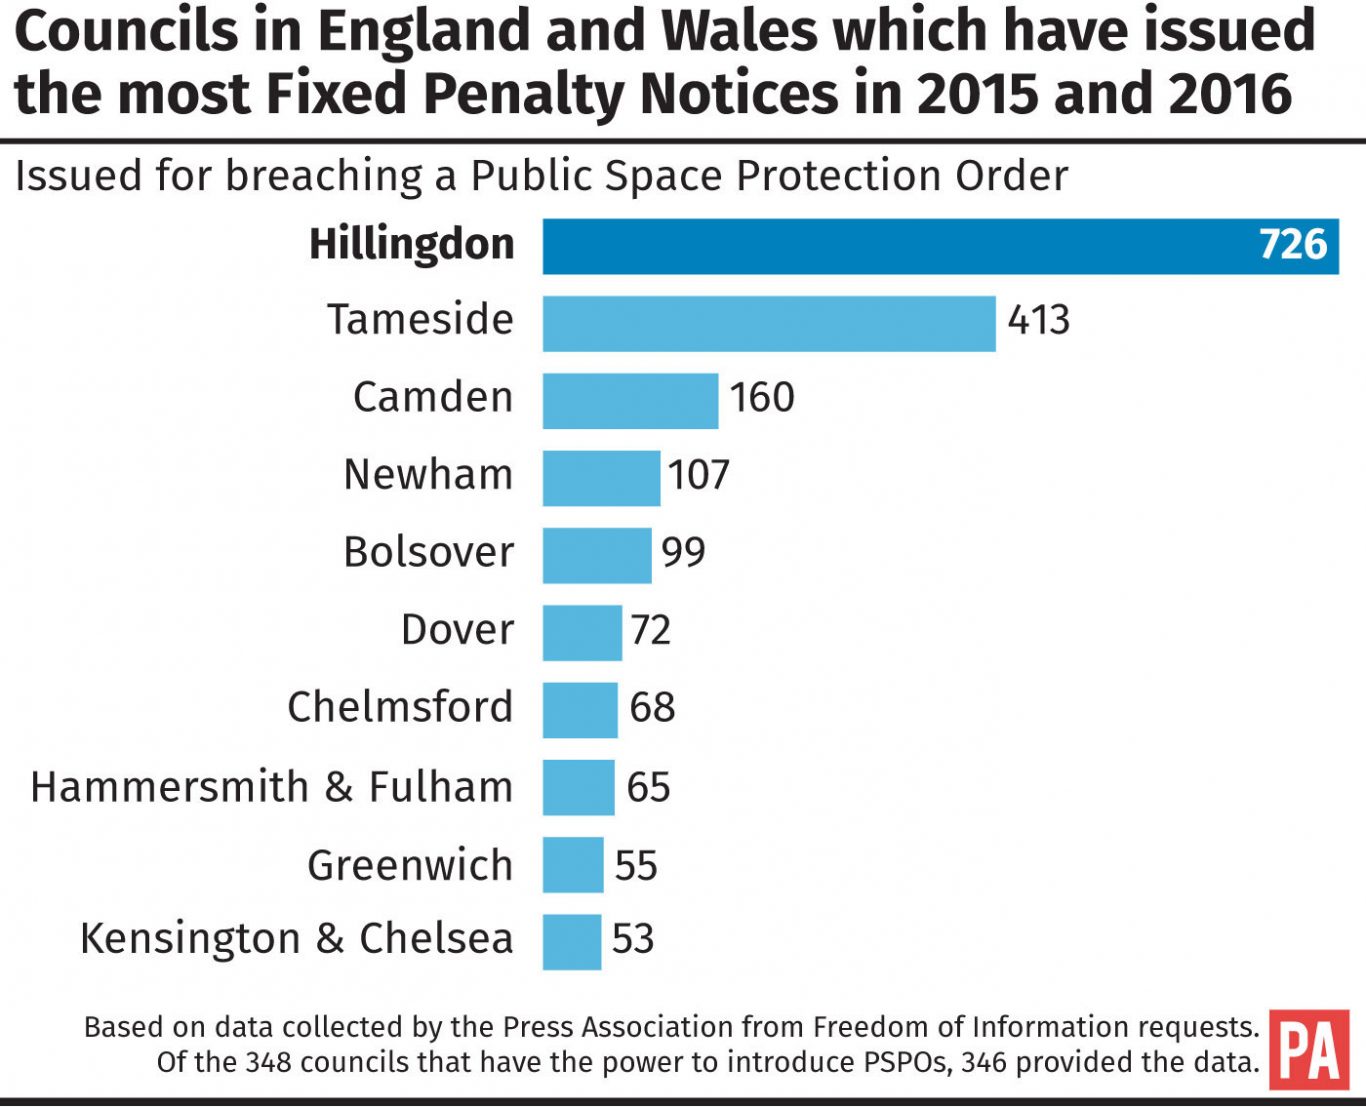 Councils in England and Wales which have issued the most Fixed Penalty Notices in 2015 and 2016 for breaching a Public Space Protection Order